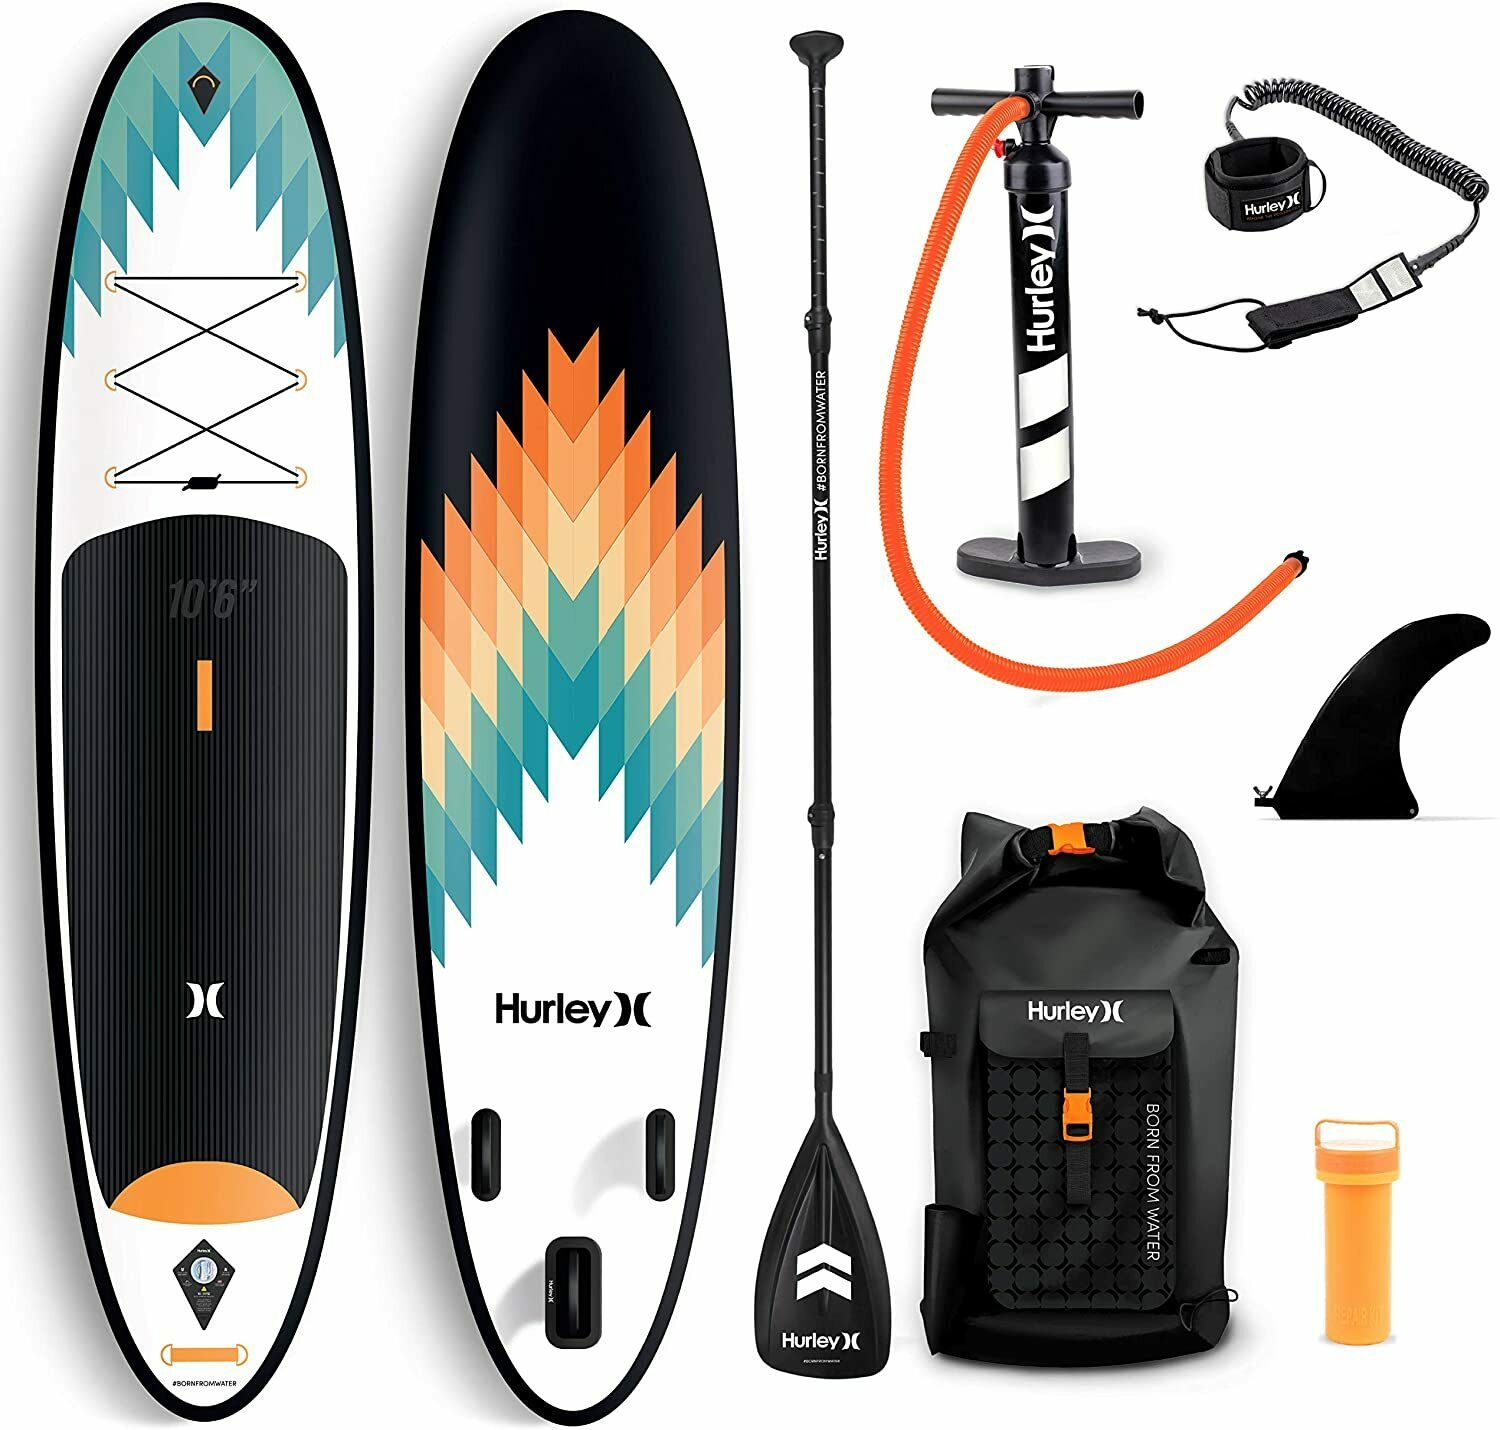 Hurley Advantage 10' 6" Outsider Stand Up Inflatable Paddle Board With Kit